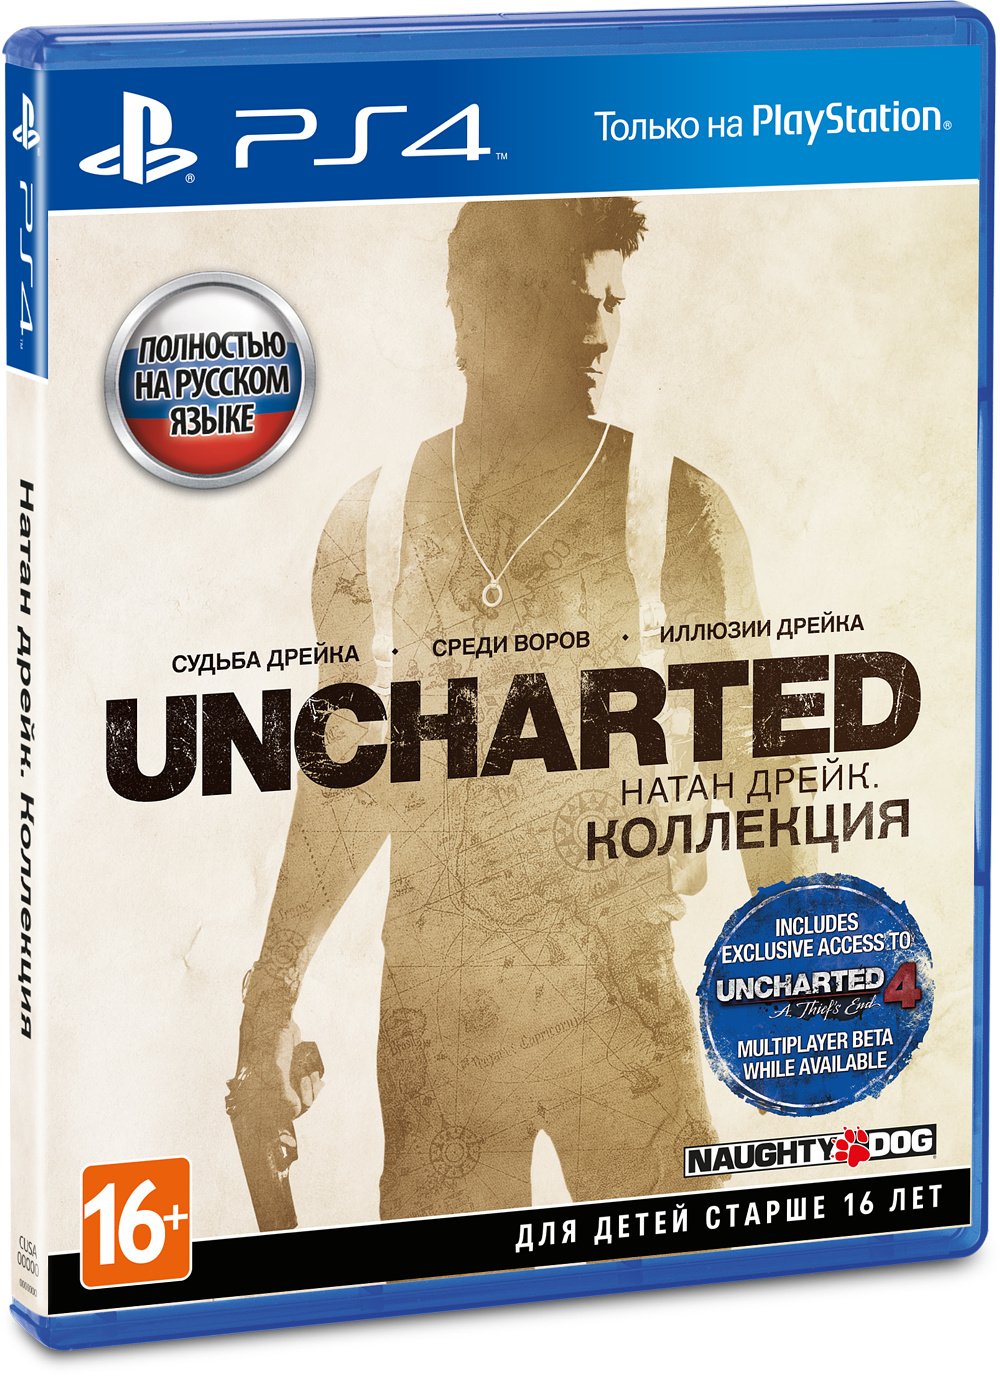 Uncharted collection купить. Uncharted collection ps4 диск.